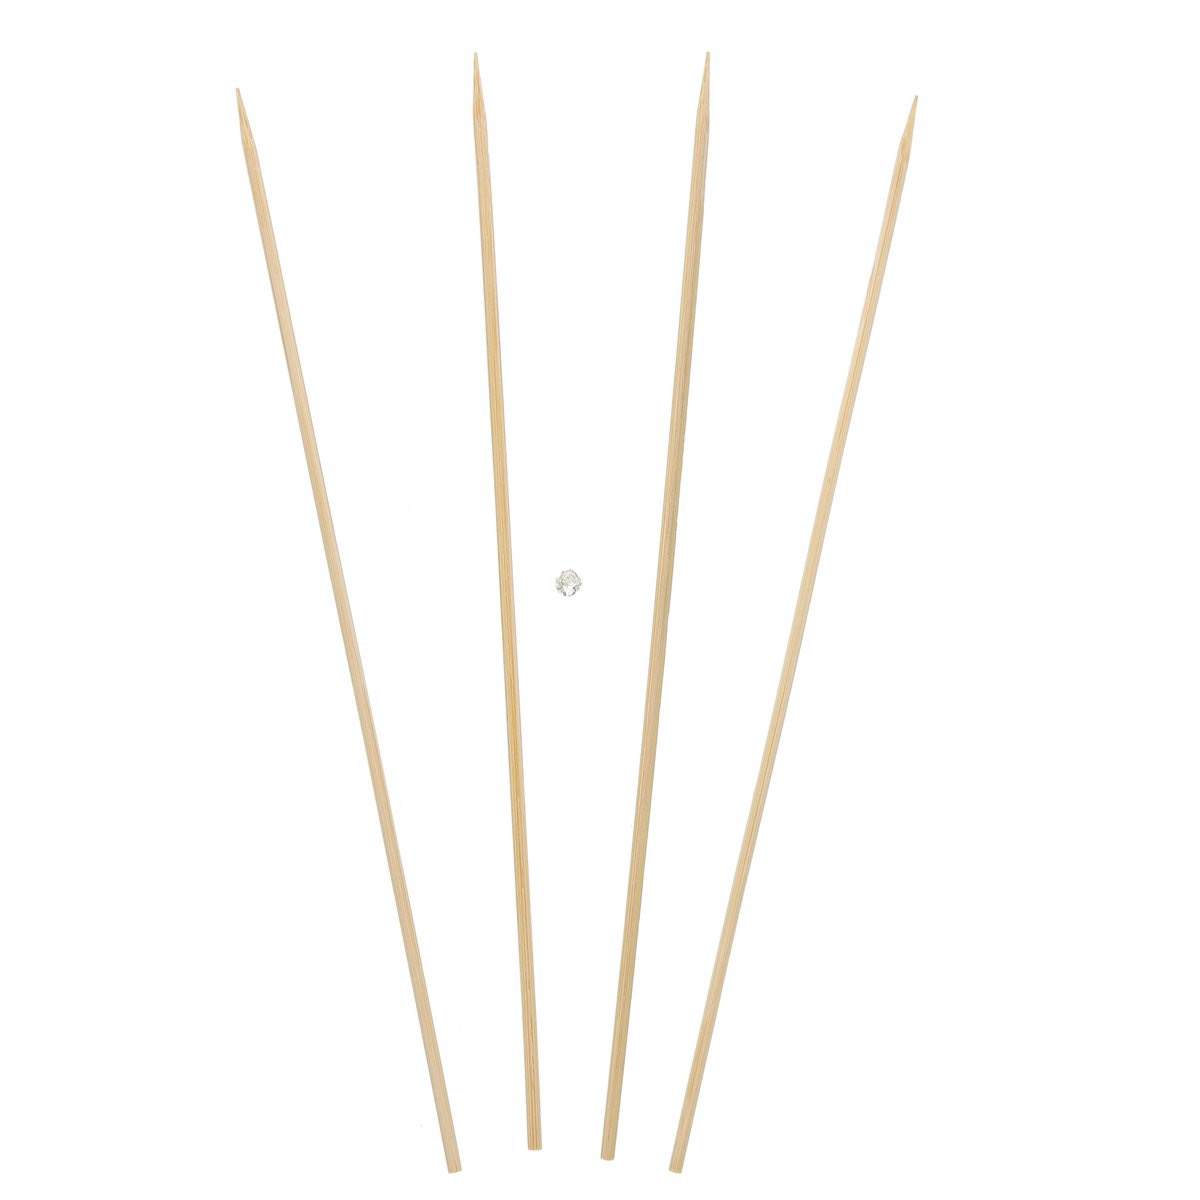 8 BAMBOO SKEWER 16X100 CT/BX